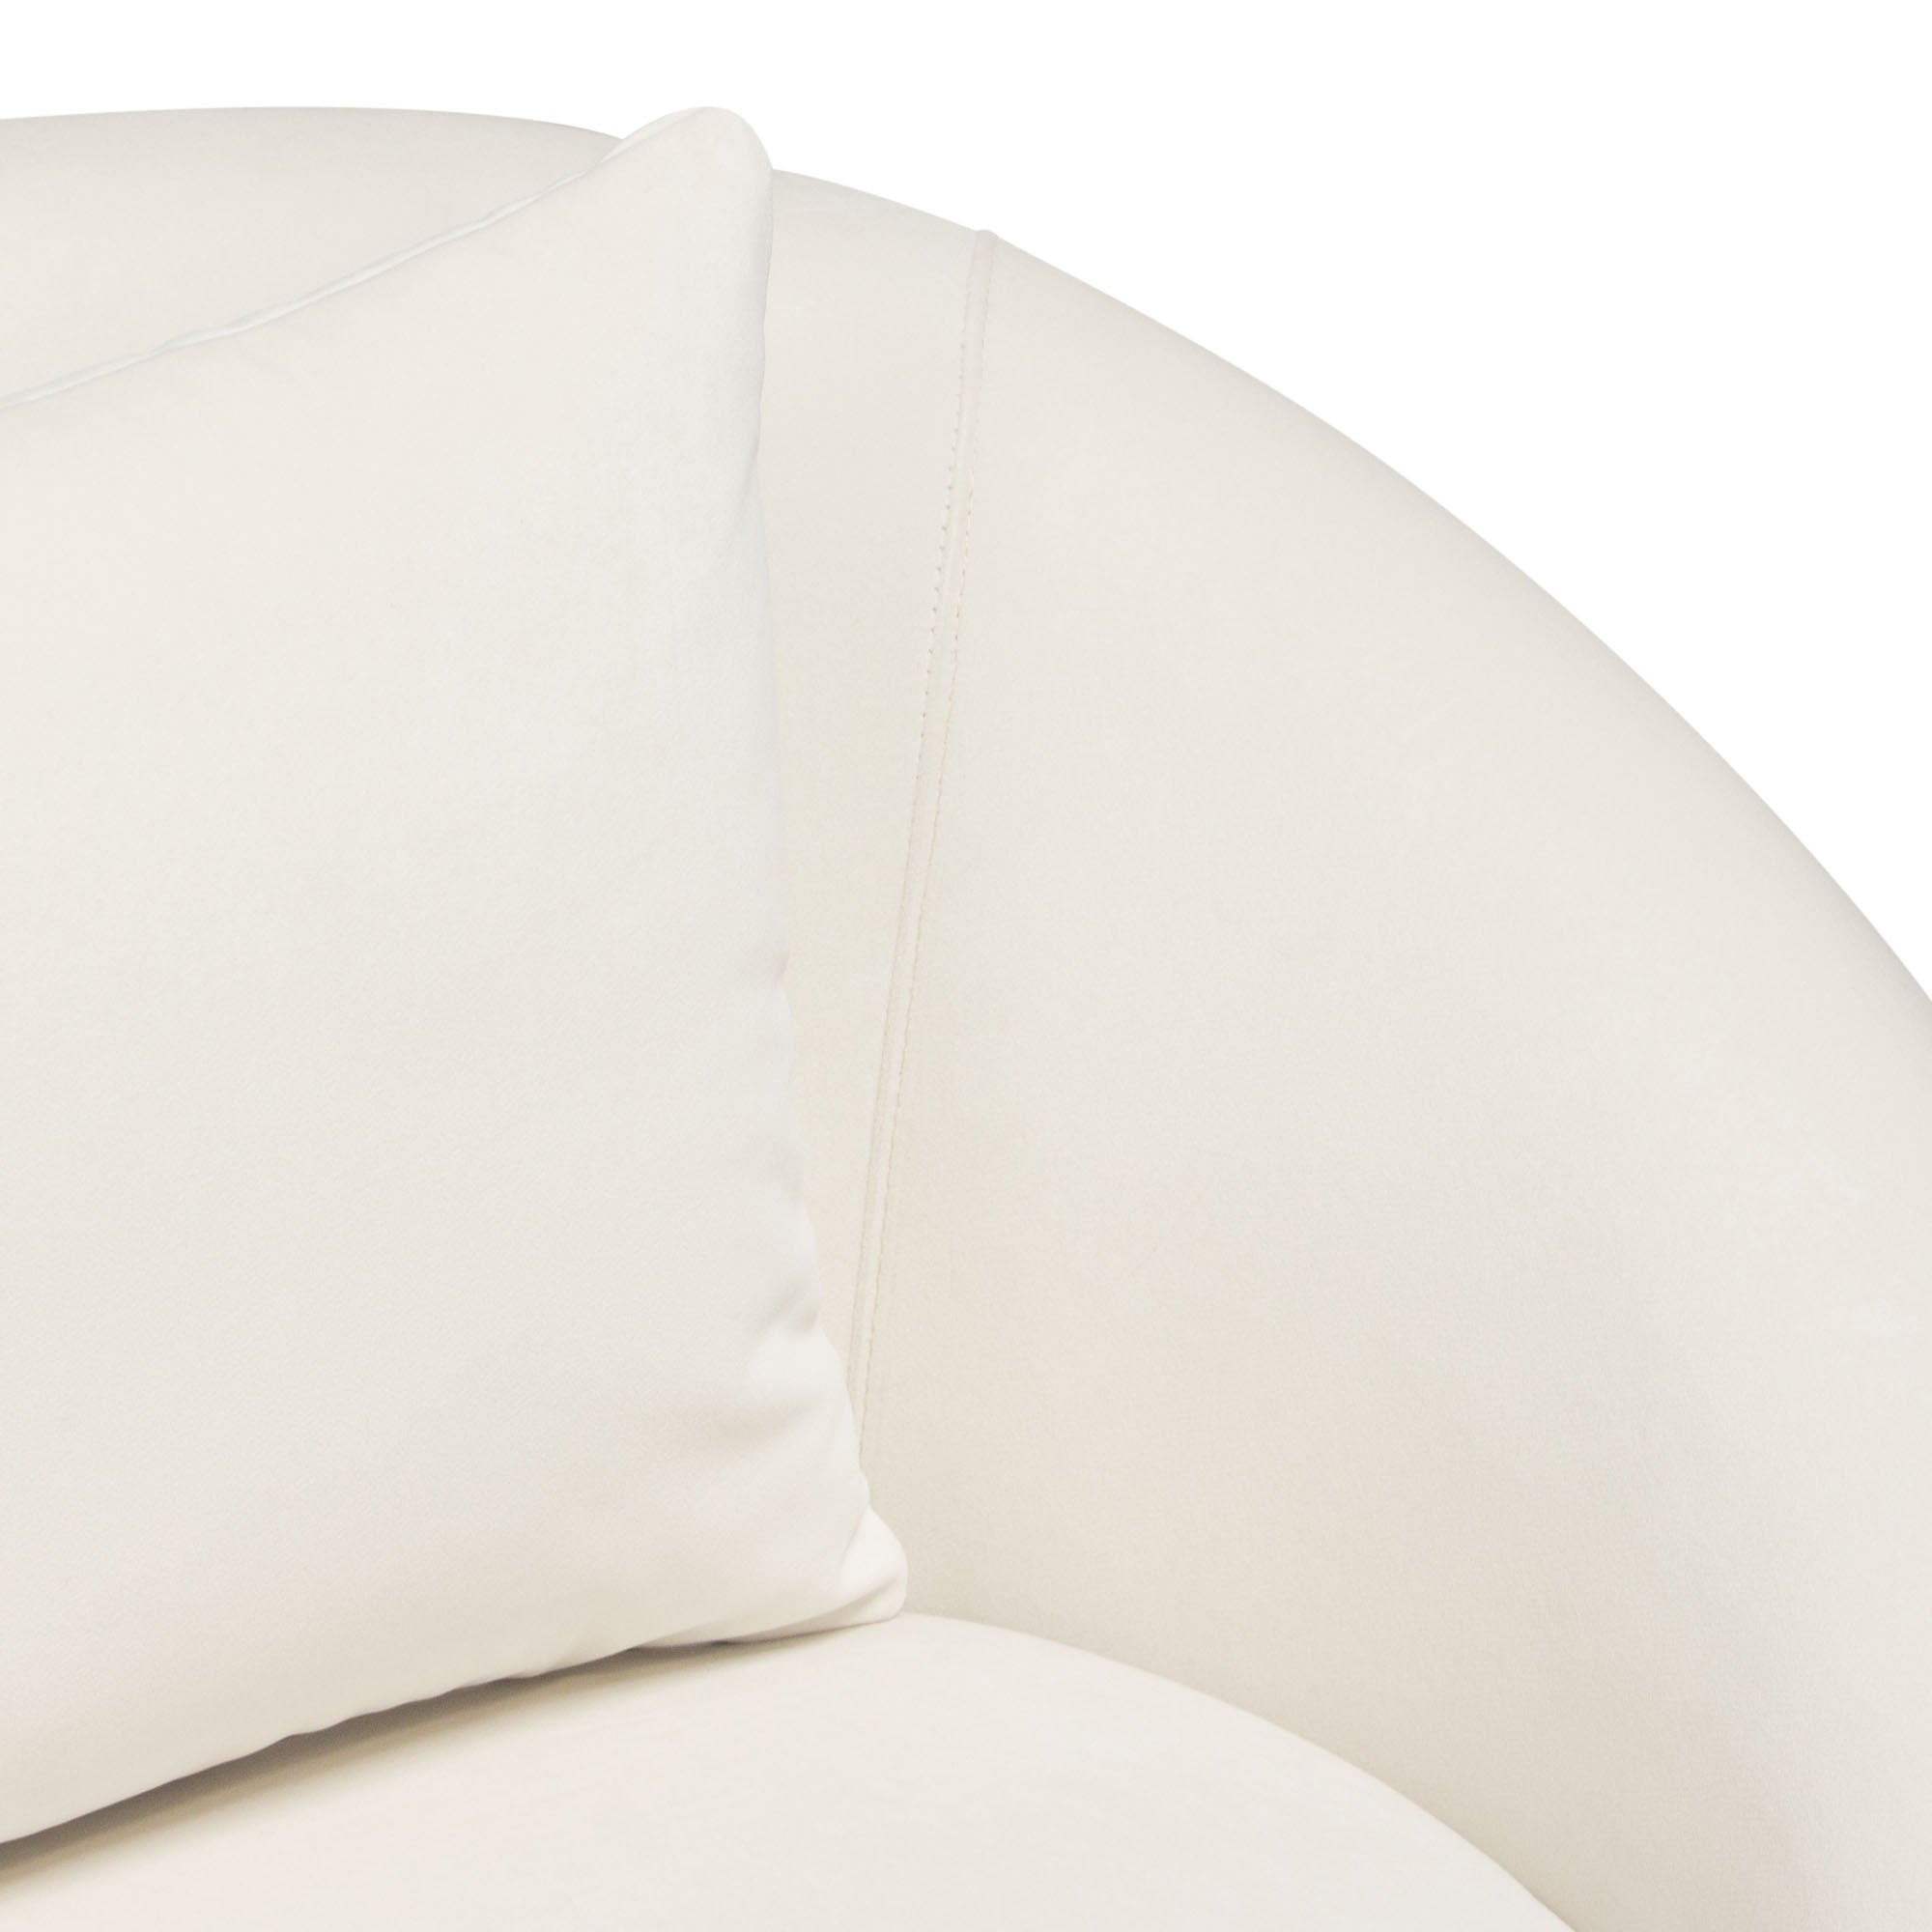 Diamond Sofa Celine Swivel Accent Chair in Light Cream Velvet with Brushed Gold Accent Band